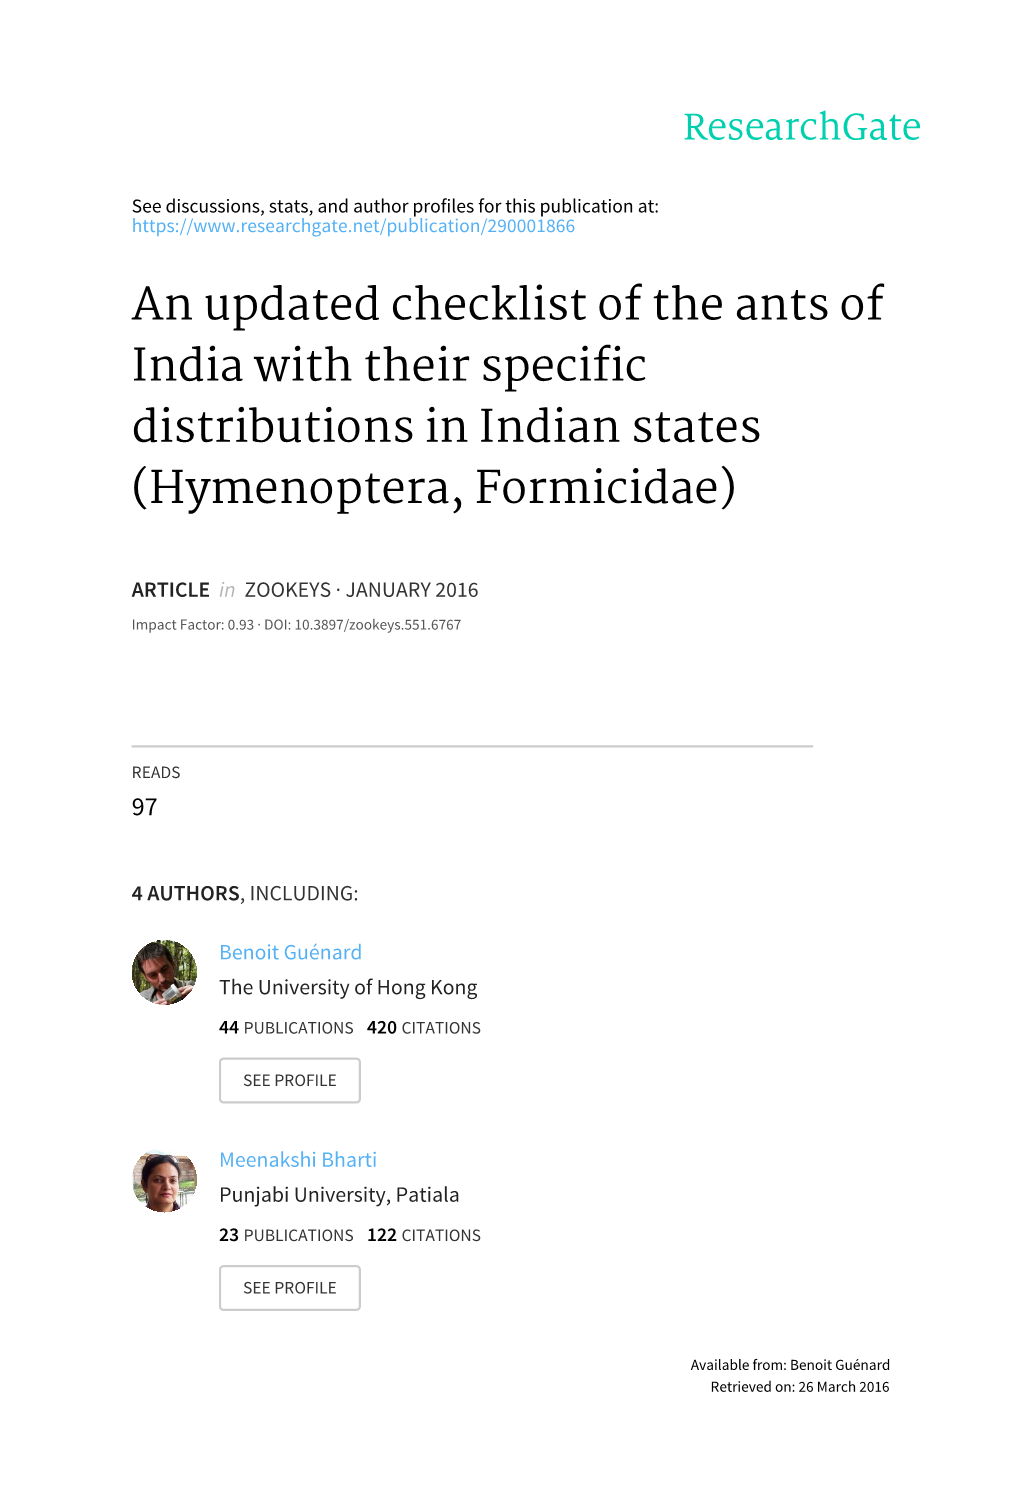 An Updated Checklist of the Ants of India with Their Specific Distributions in Indian States (Hymenoptera, Formicidae)